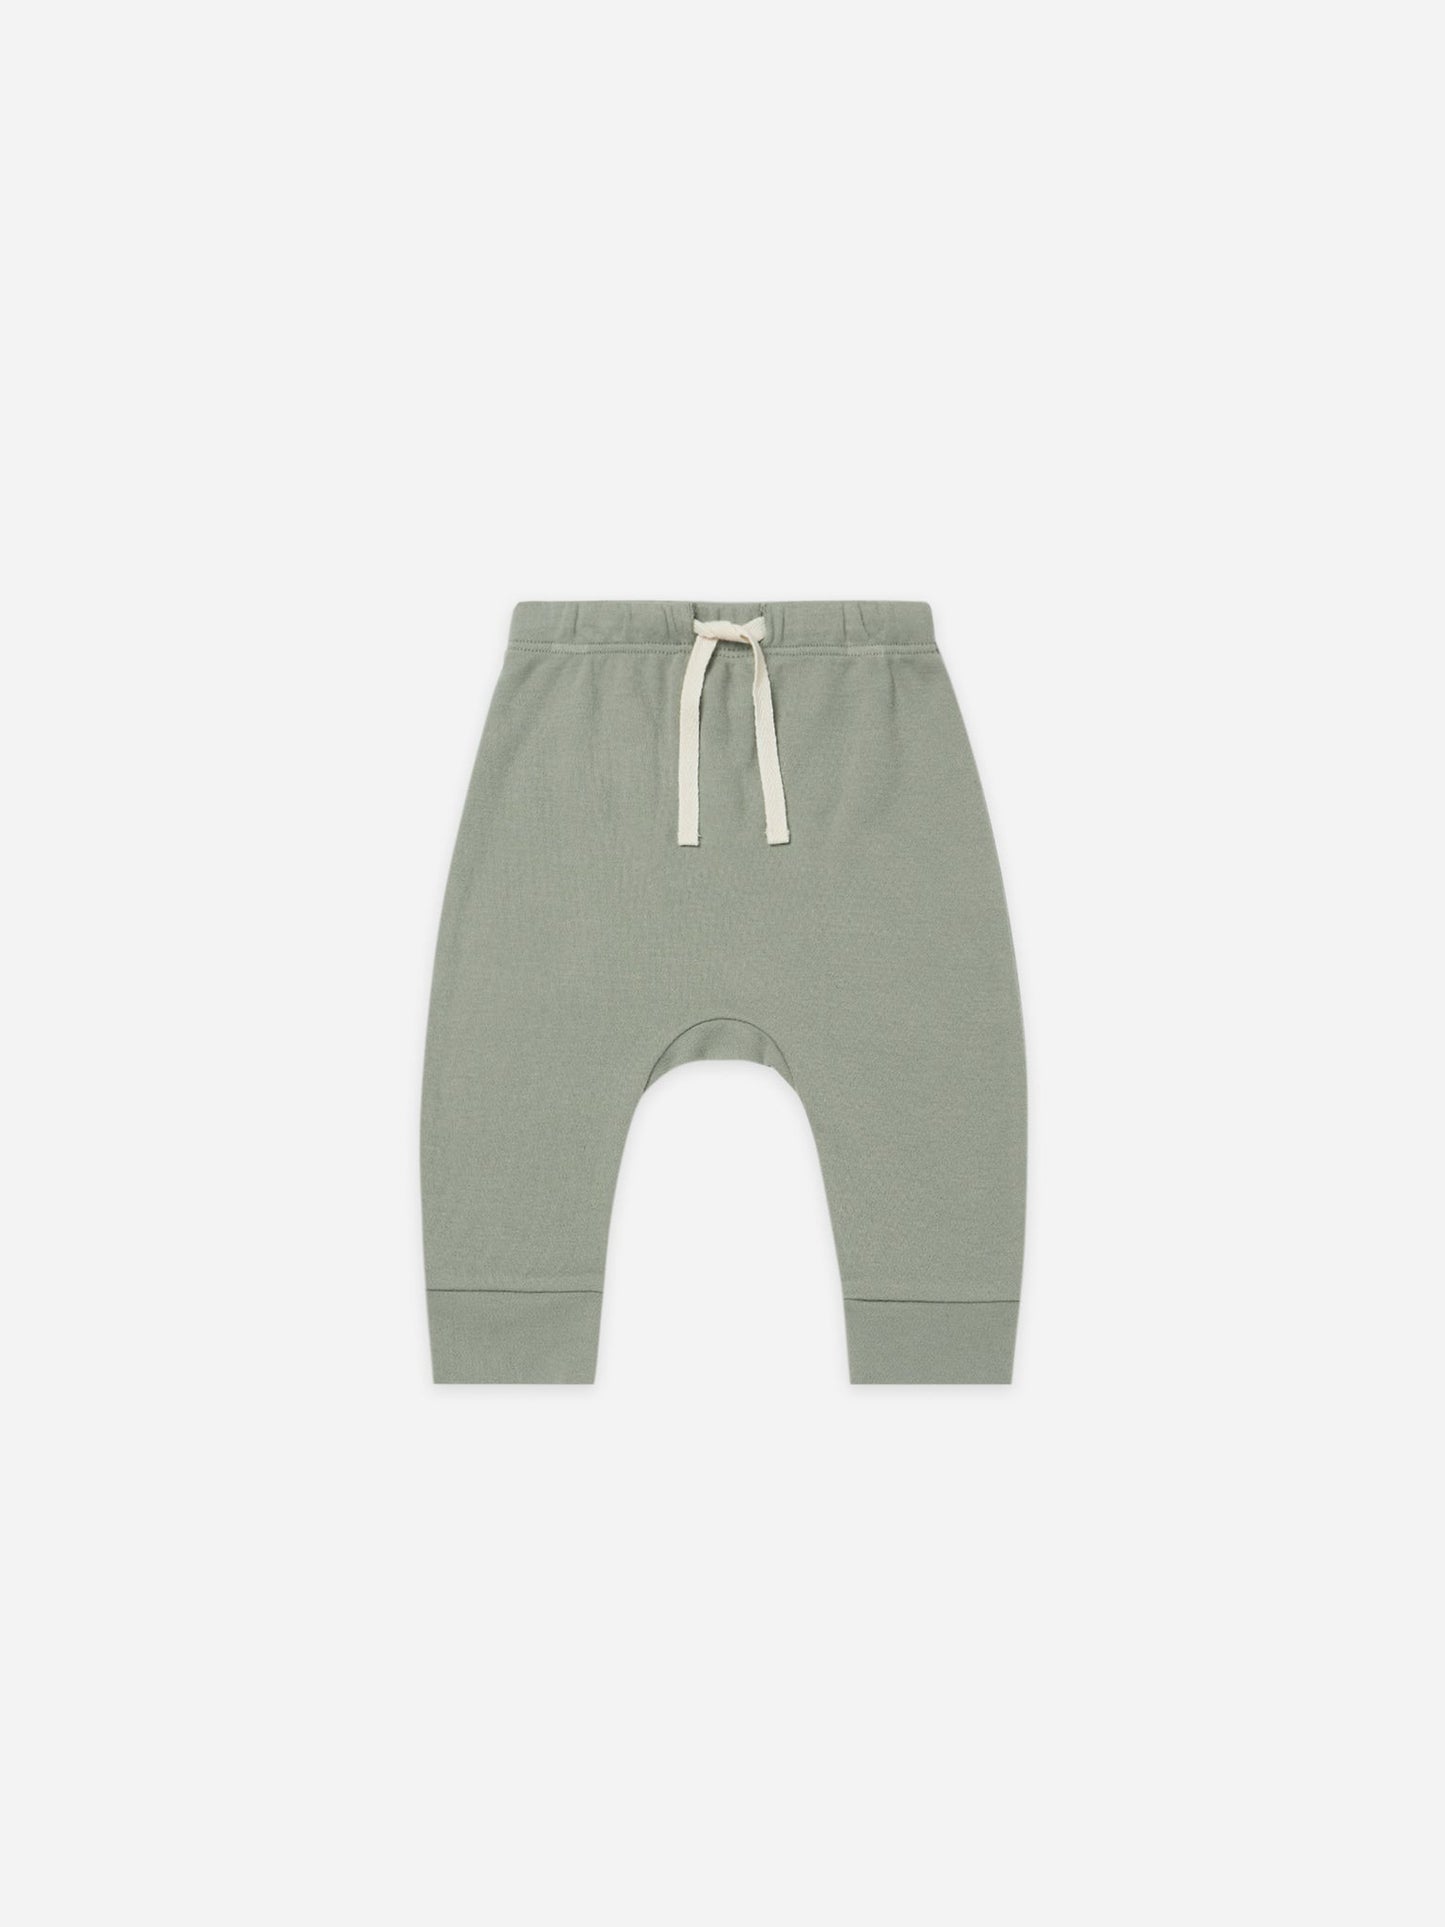 Quincy Mae - Drawstring Pant (Spruce)